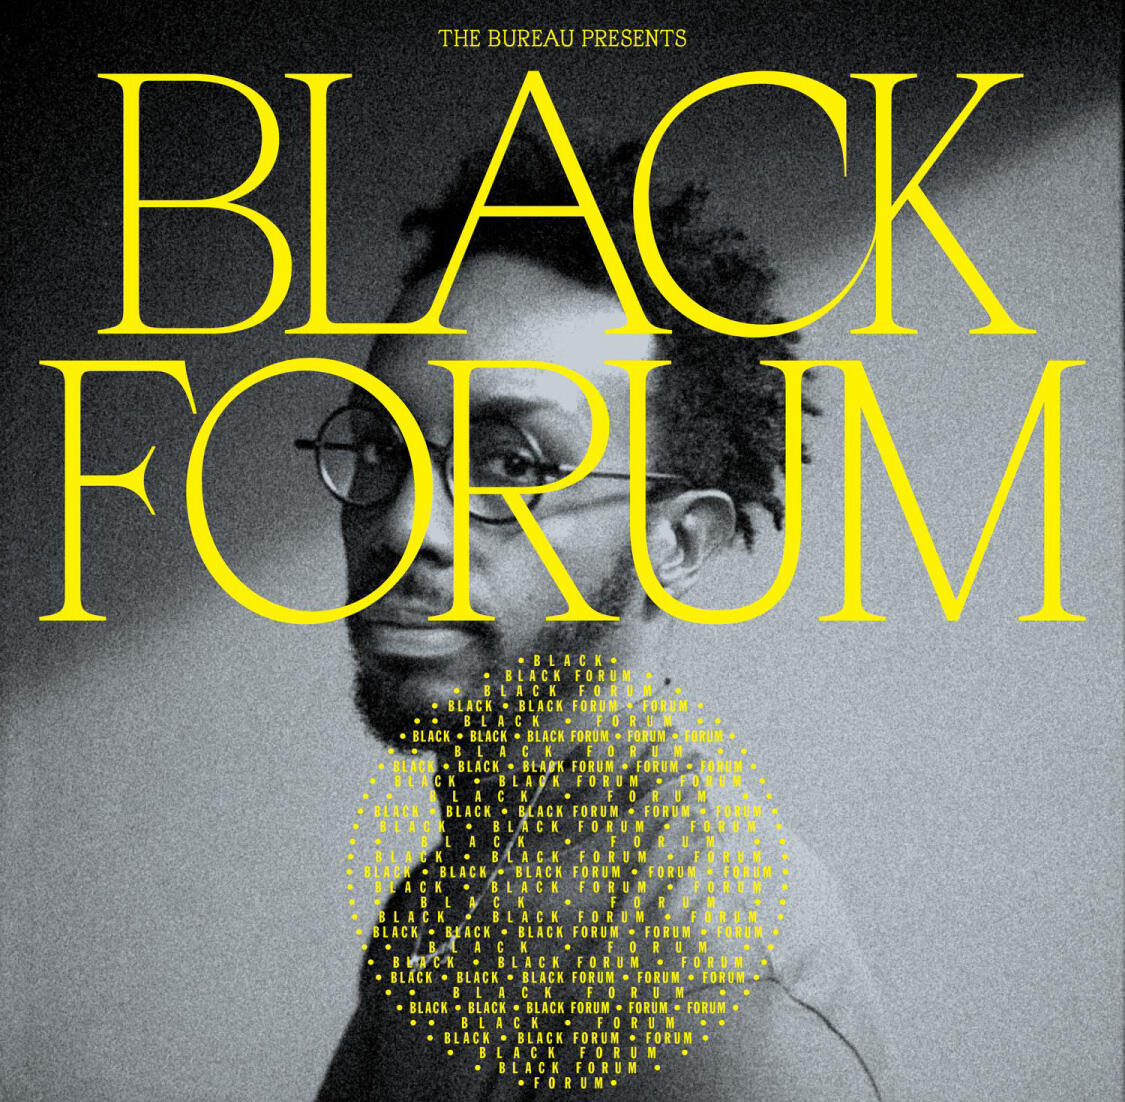 Black and white image of a person, with BLACK FORUM in yellow lettering displayed over the image